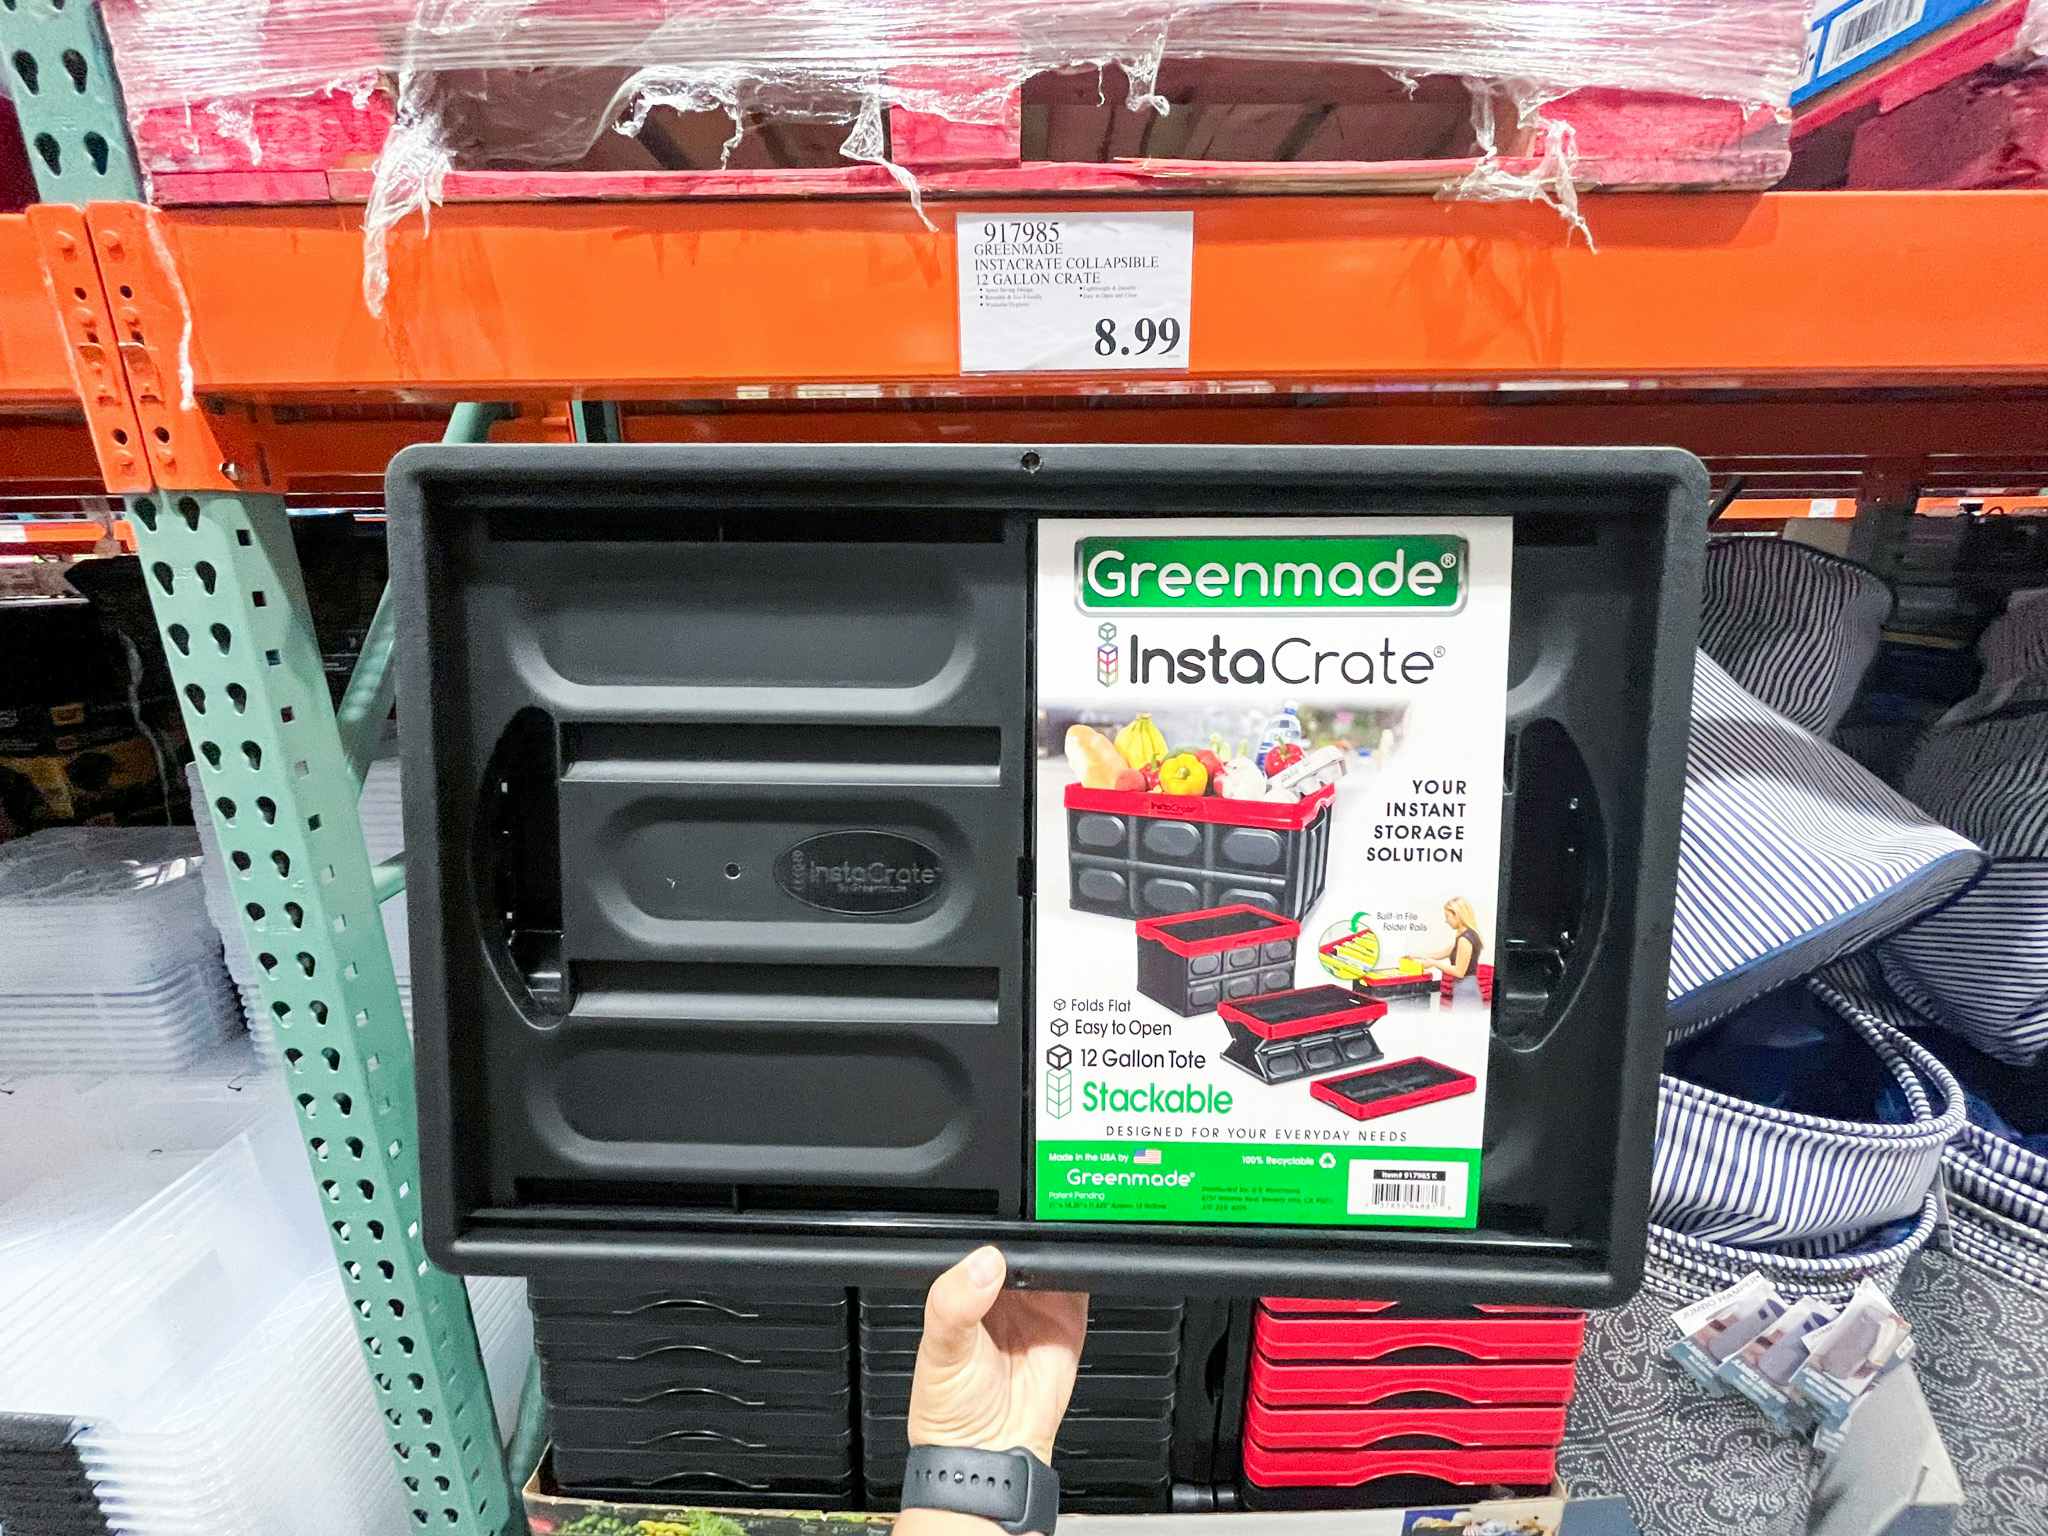 costco greenmade instacrate collapsible storage bin-2